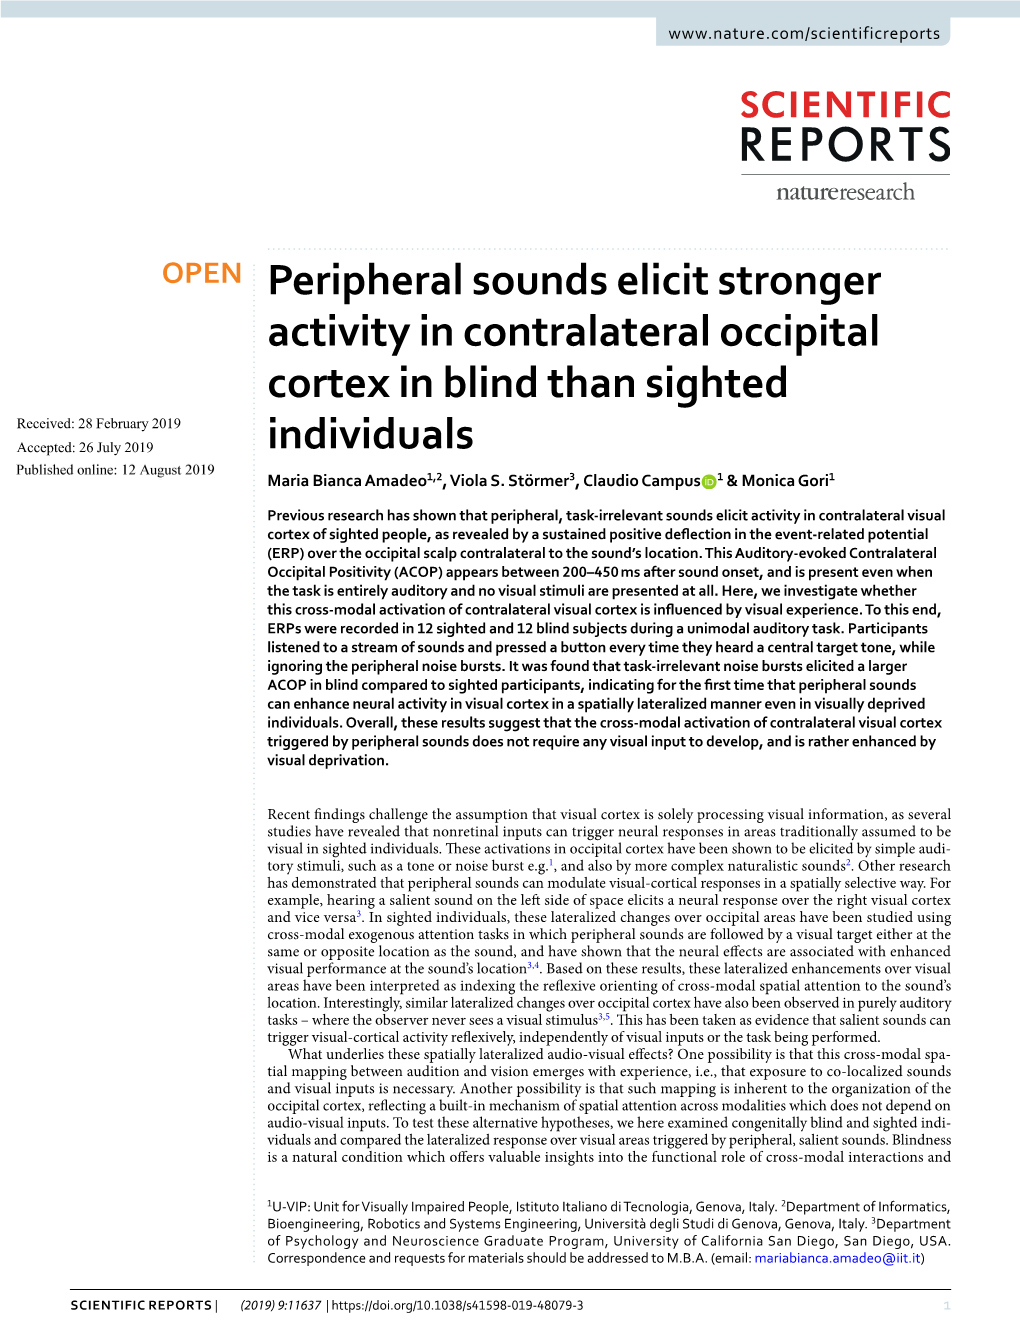 Peripheral Sounds Elicit Stronger Activity in Contralateral Occipital Cortex in Blind Than Sighted Individuals